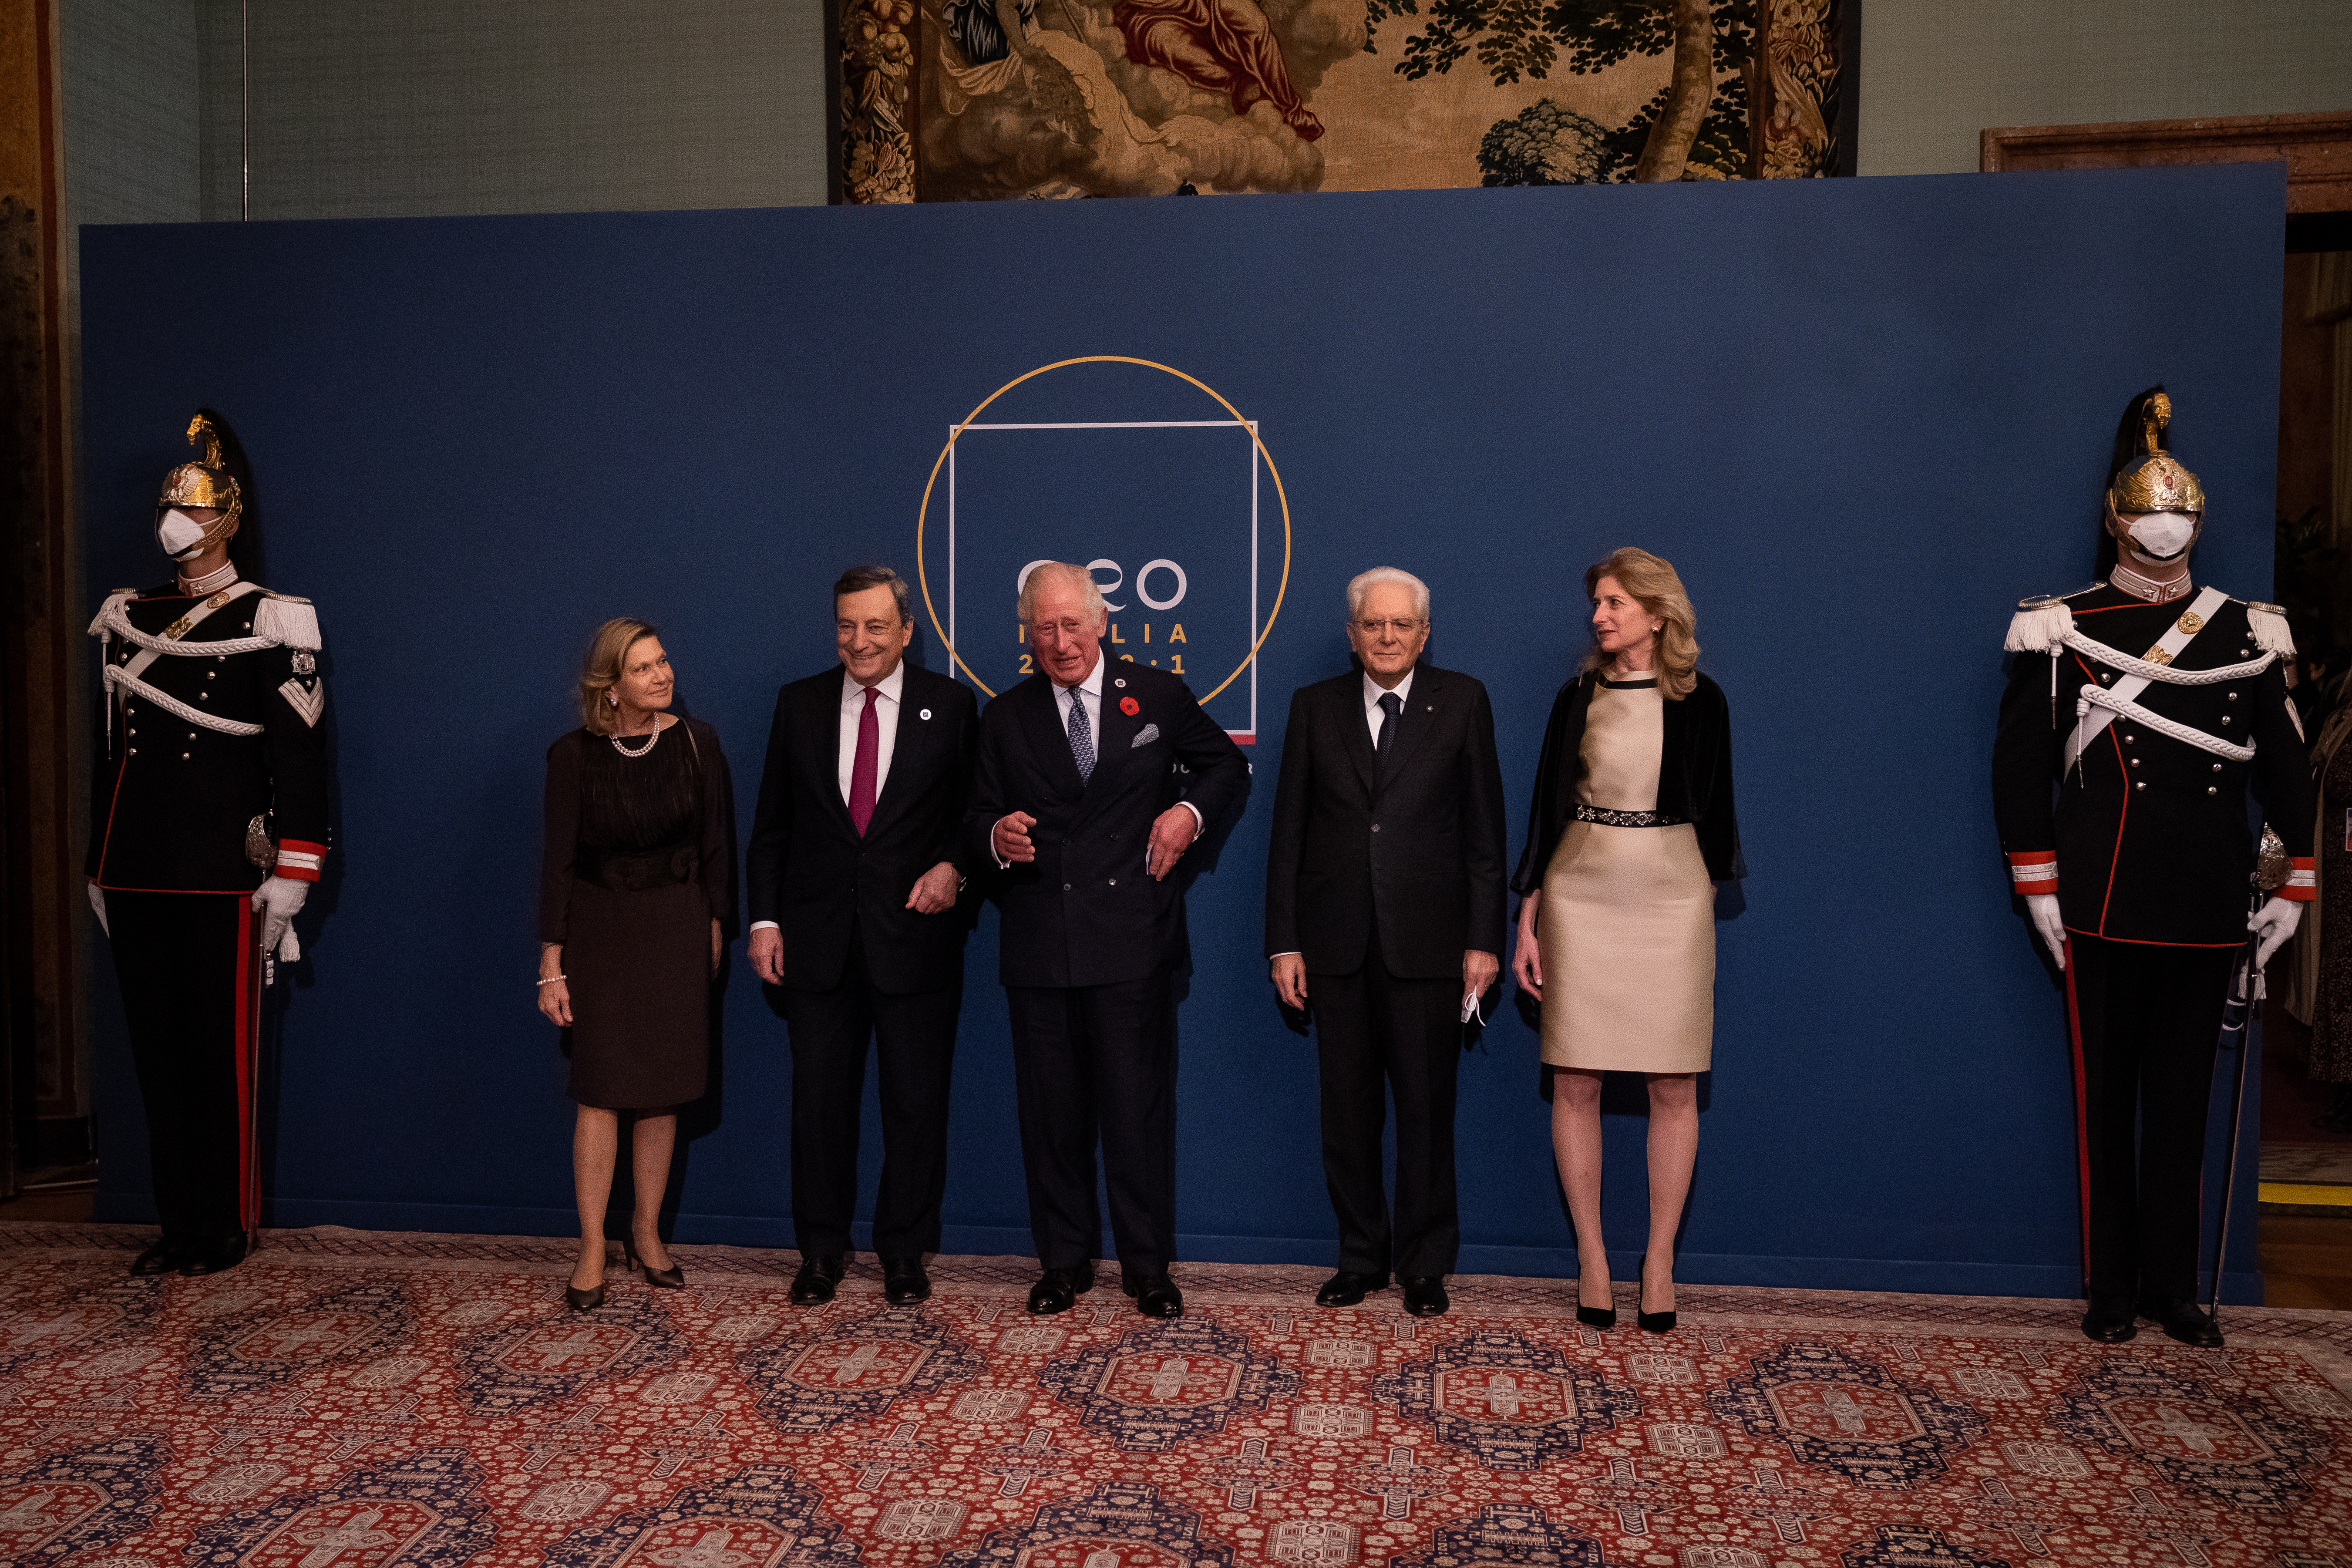 Prince Charles, center, poses with Italian President Sergio Mattarella, second from right, and his daughter, Laura Mattarella, right, and Italian Prime Minister Mario Draghi, second from left, and his wife, Maria Serena Cappello as he attends a reception and dinner at The Quirinale Palace on October 30, 2021 in Rome, Italy. 